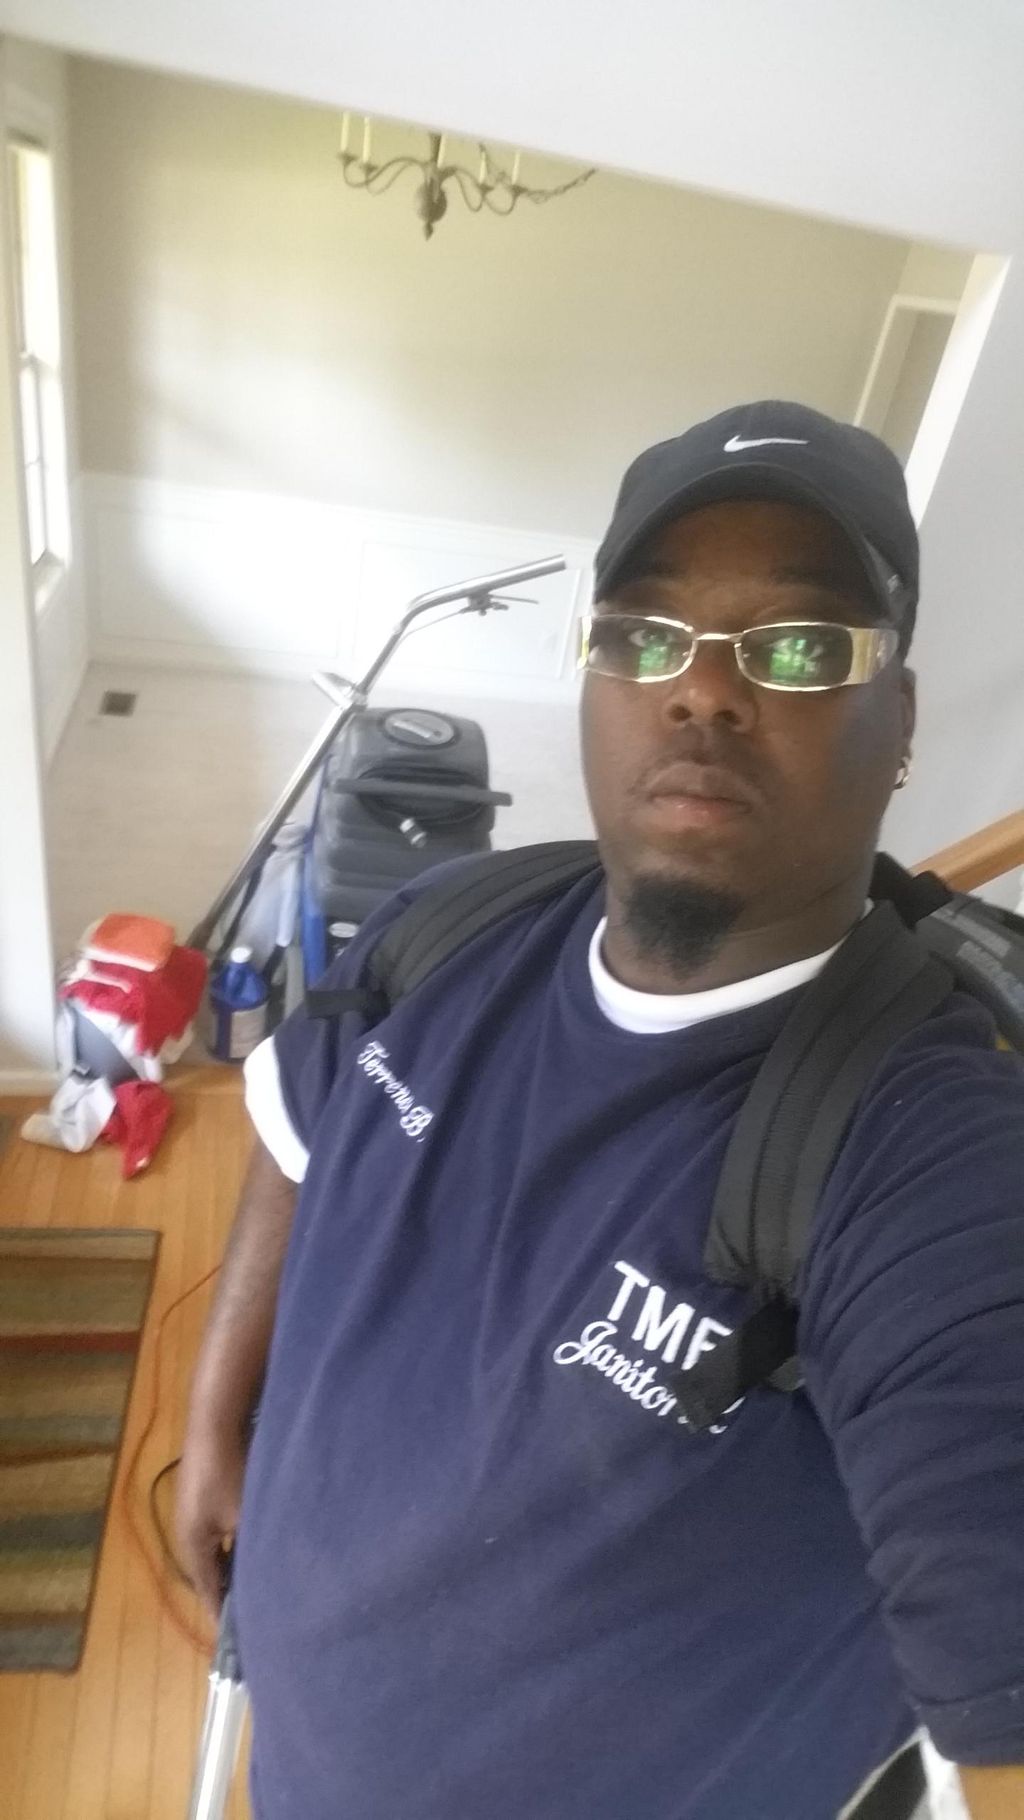 TMB Janitorial Services